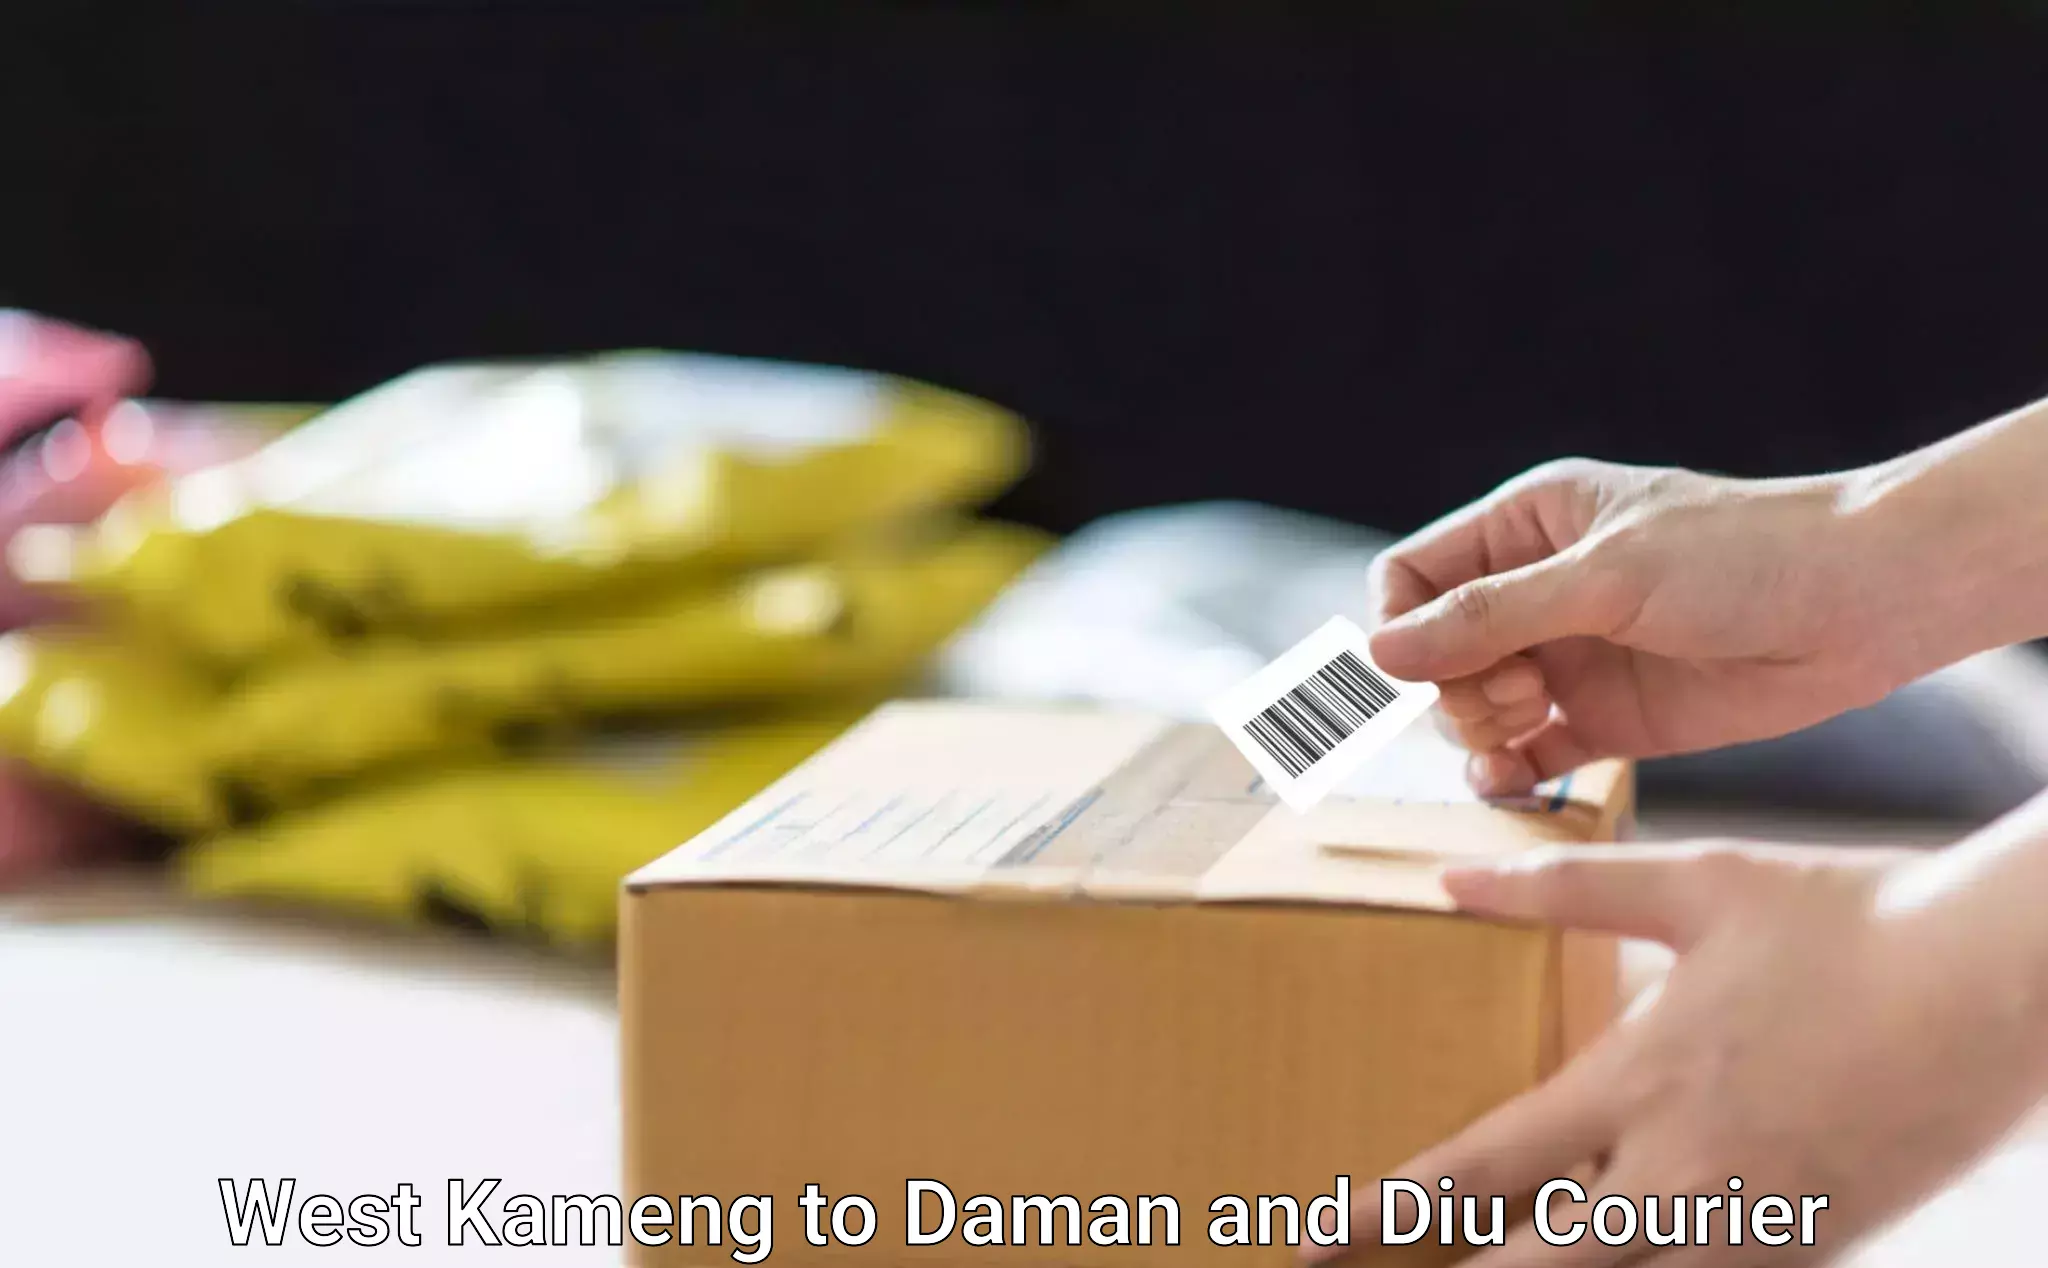 Domestic delivery options West Kameng to Diu